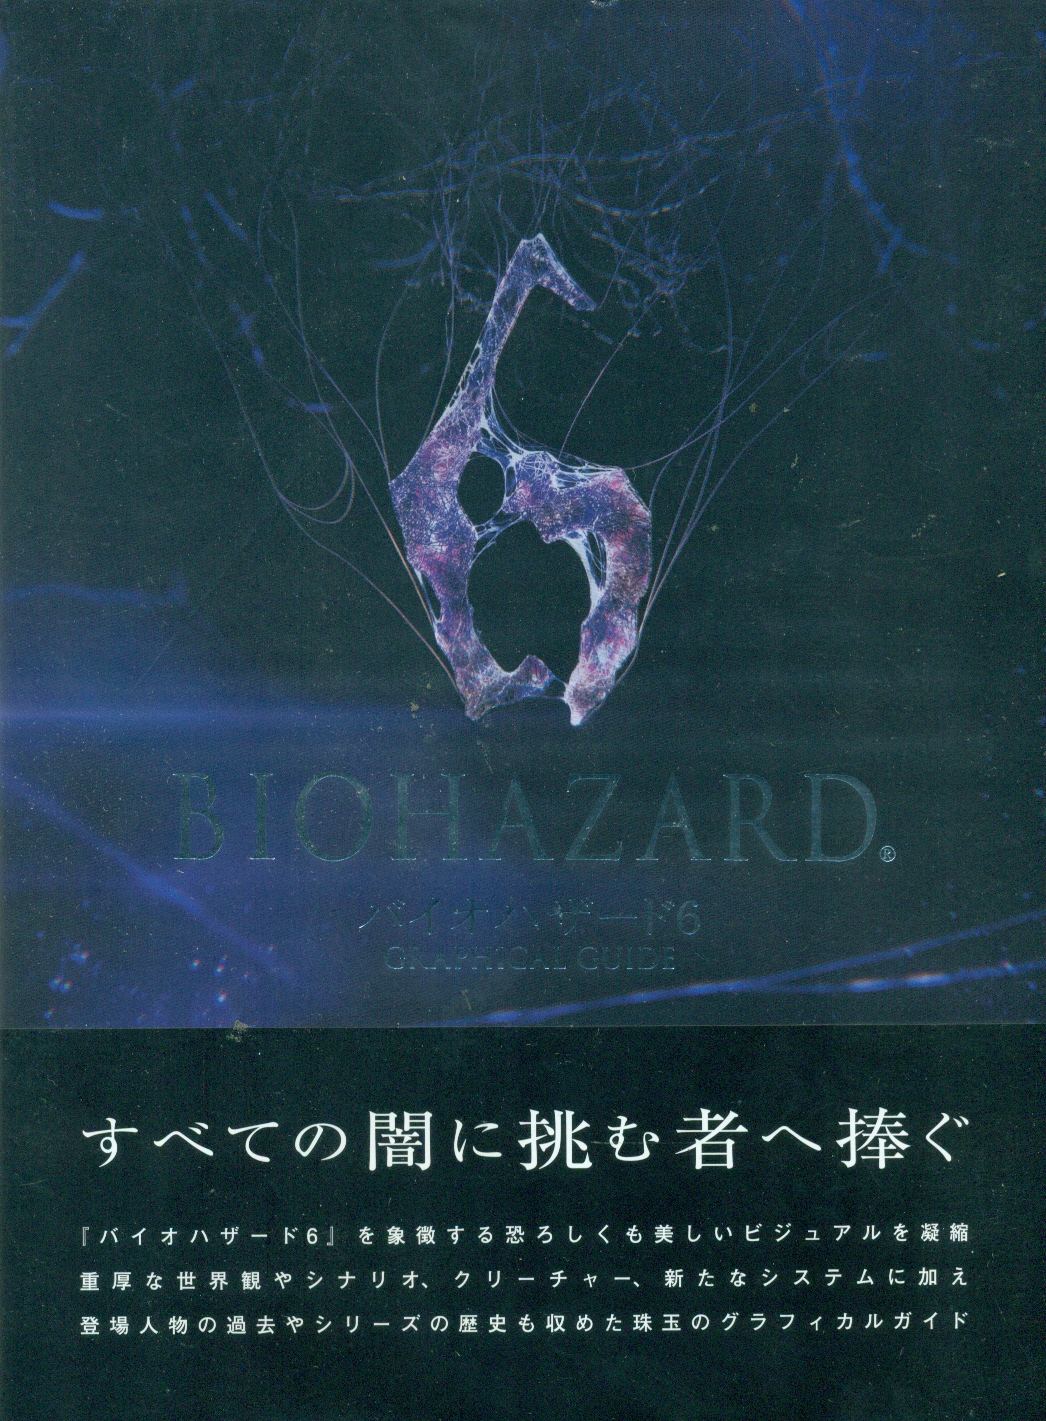 Biohazard Resident Evil 6 Graphical Guide